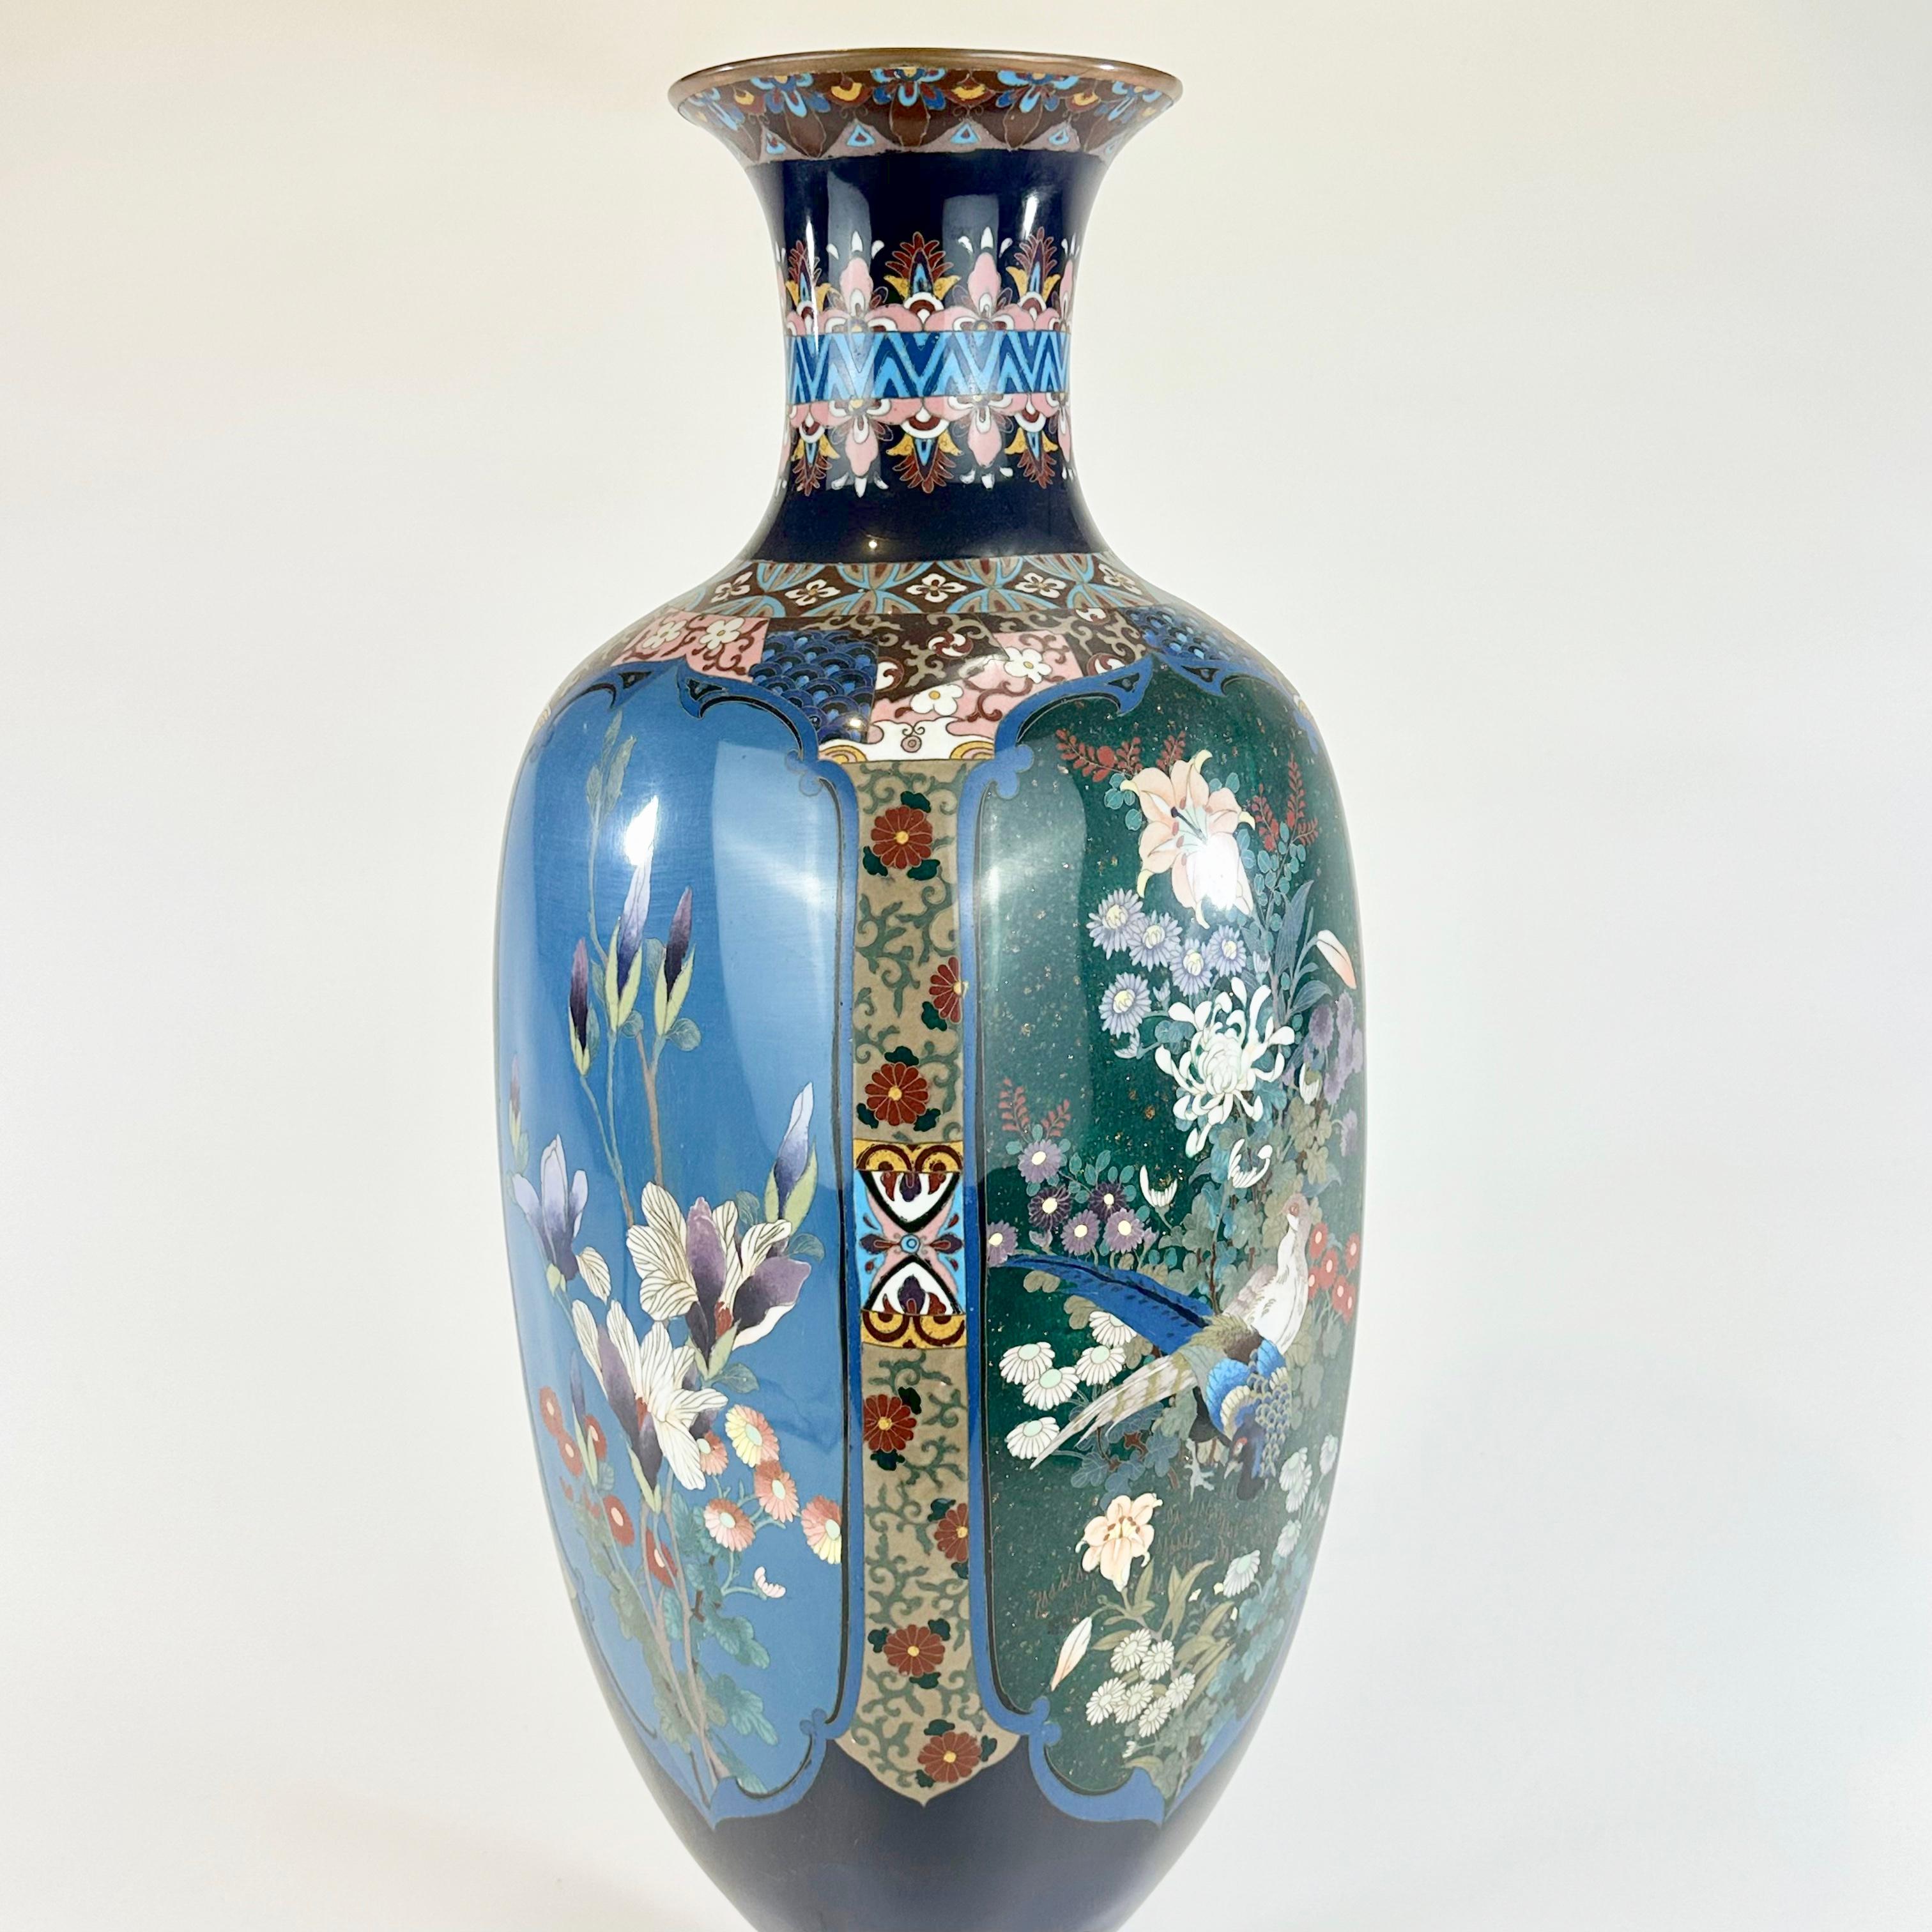 Hand-Crafted Very Rare Antique Japanese Meiji Era (late 1800's) Cloisonné Vase 24